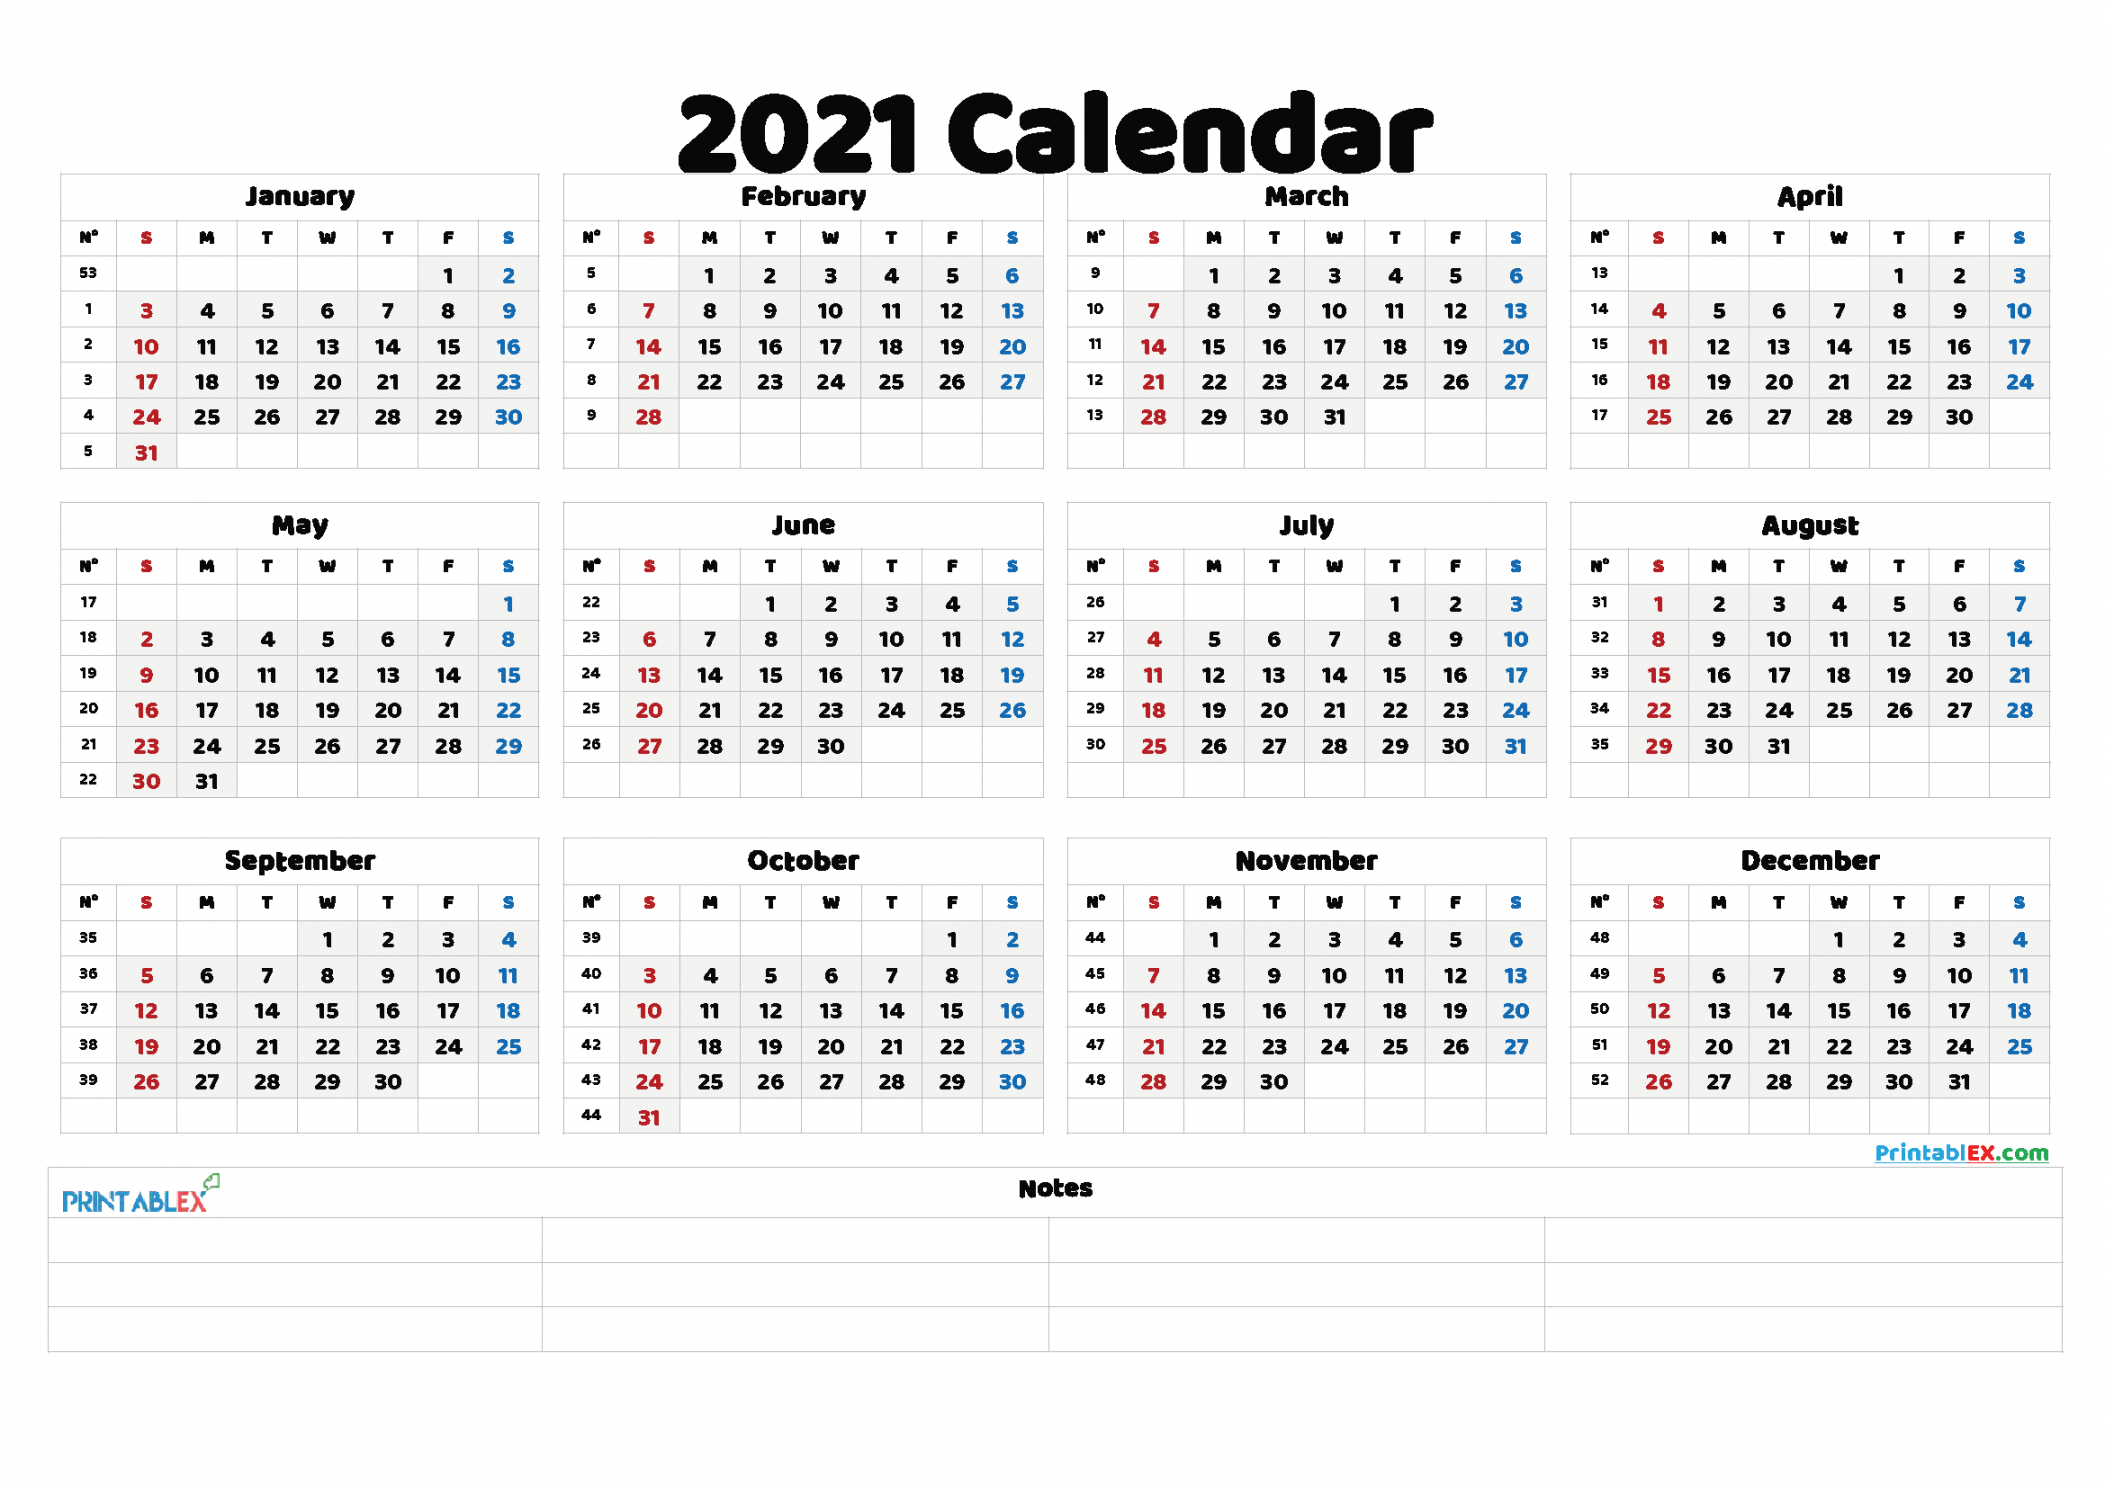 Yearly Calendar with Week Numbers - Printable and Easy to Use